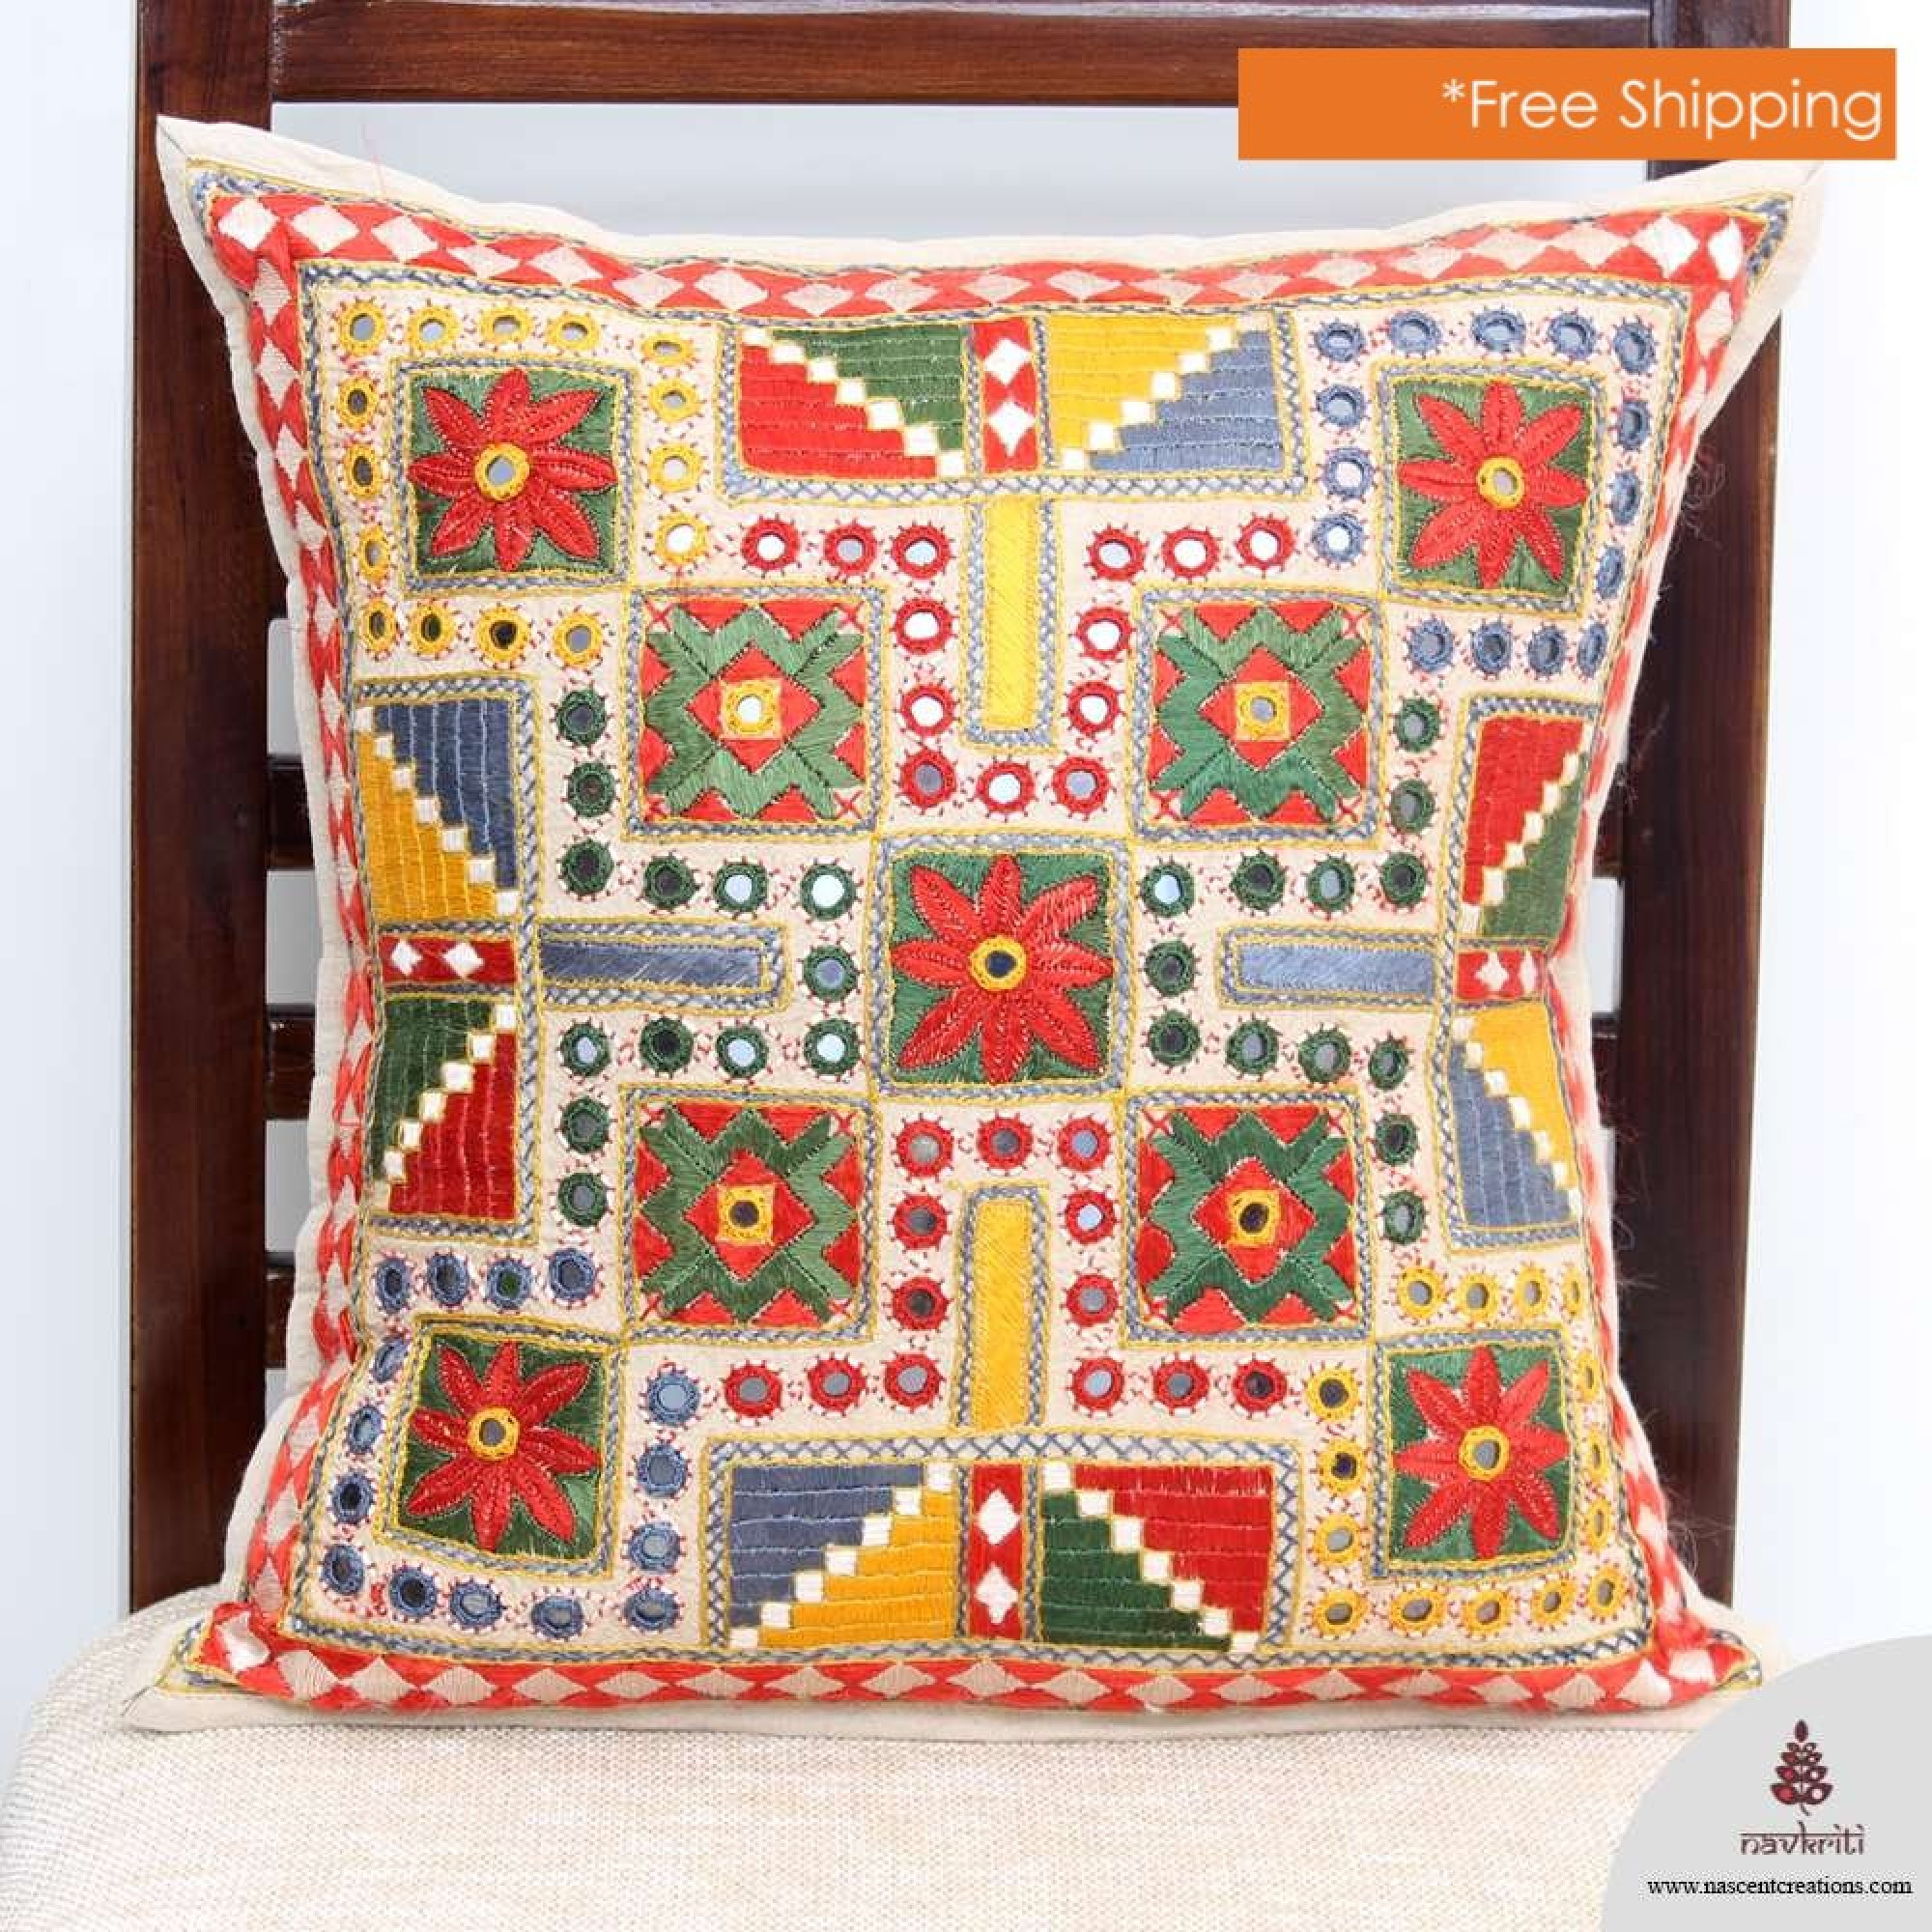 Cushion Cover Embroidery Patterns Hand Embroidery All Over Mirror Work Cushion Cover Navkriti